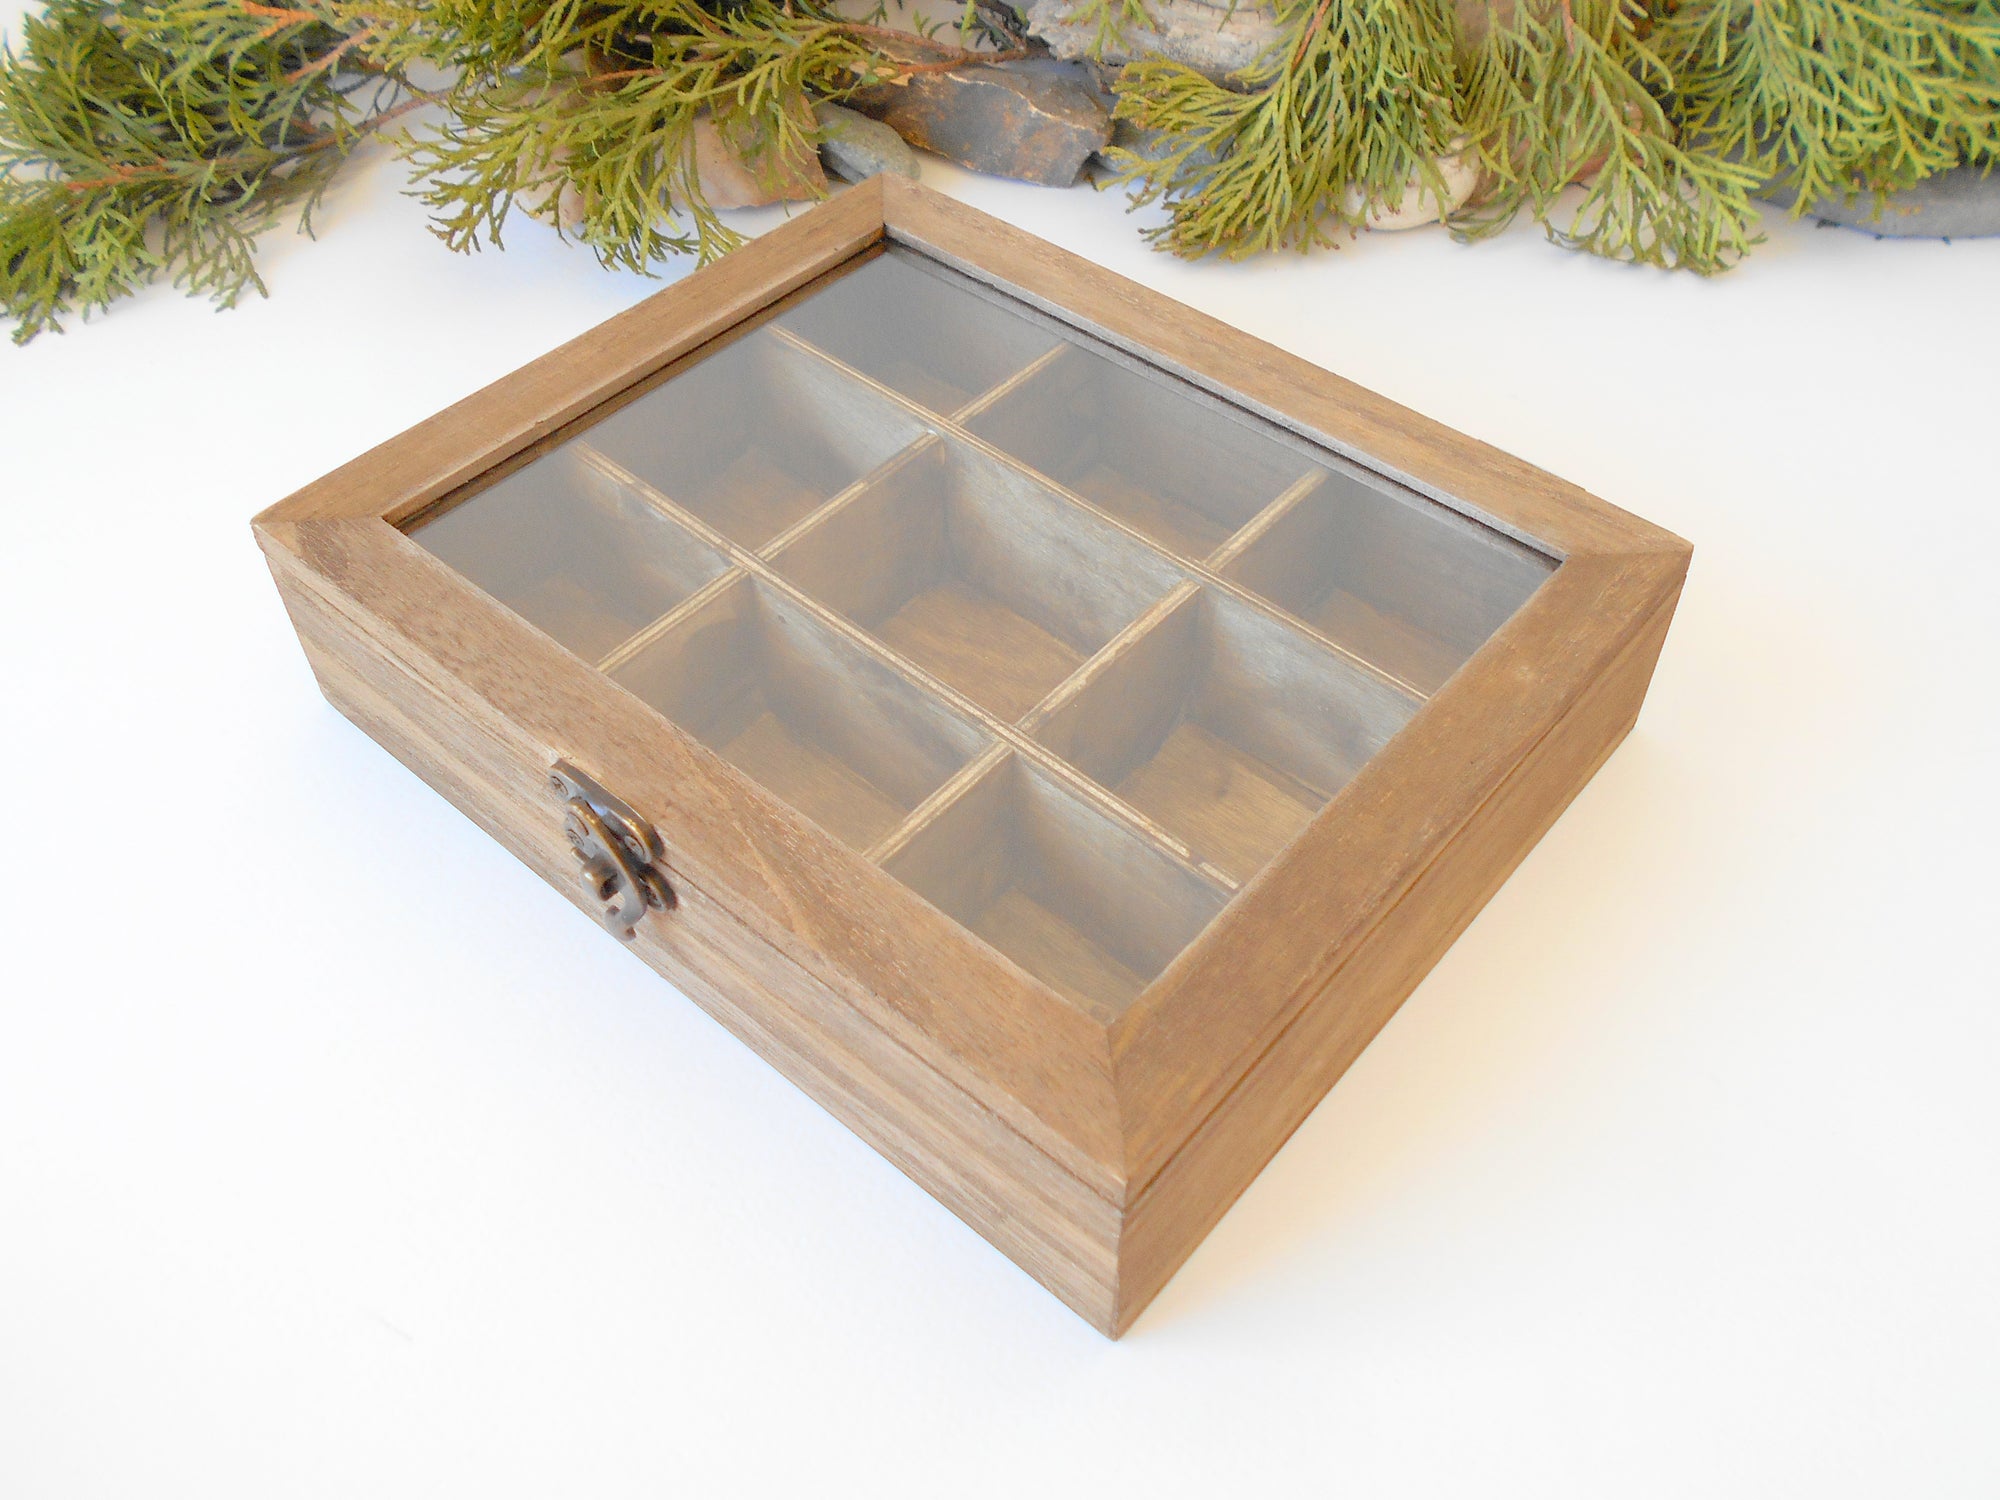 This is a wooden box with a glass display that is made of bamboo wood and that has metal hinges and closes with a bronze-color closing that may display various things like jewelry, miniatures, crystals, or other small objects of importance to you or your friends. <span data-mce-fragment="1">I have colored the box with mordant so that it looks like an old wood vintage box with a mahogany color.</span>